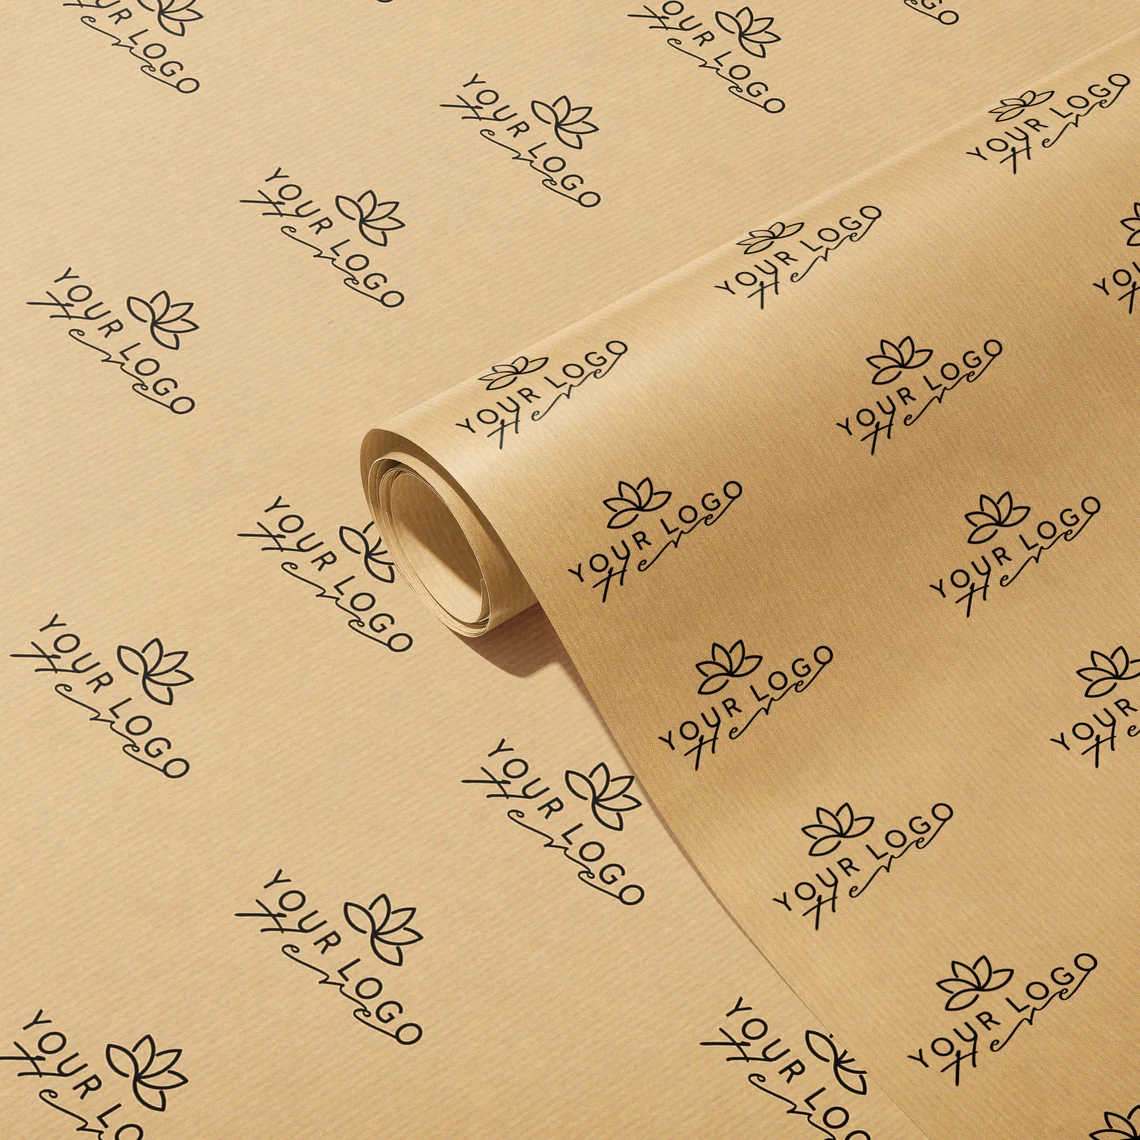 Buy RUSPEPA Kraft Wrapping Paper Roll- Recycled Nature Paper for